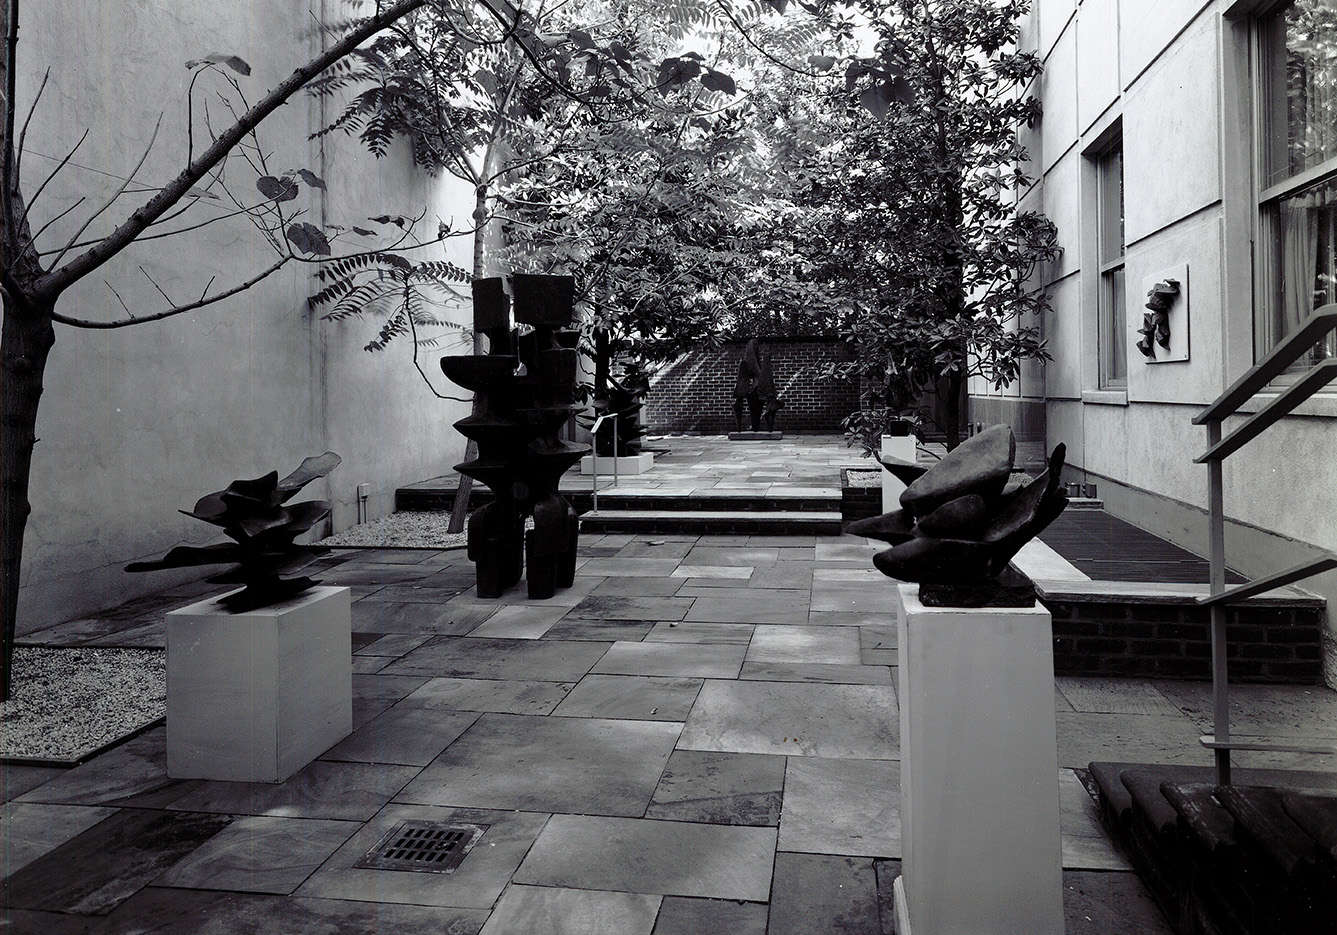 The Alicia Penalba exhibition in 1966 was the first exhibition in the sculpture court. Photograph courtesy the Phillips Collection.